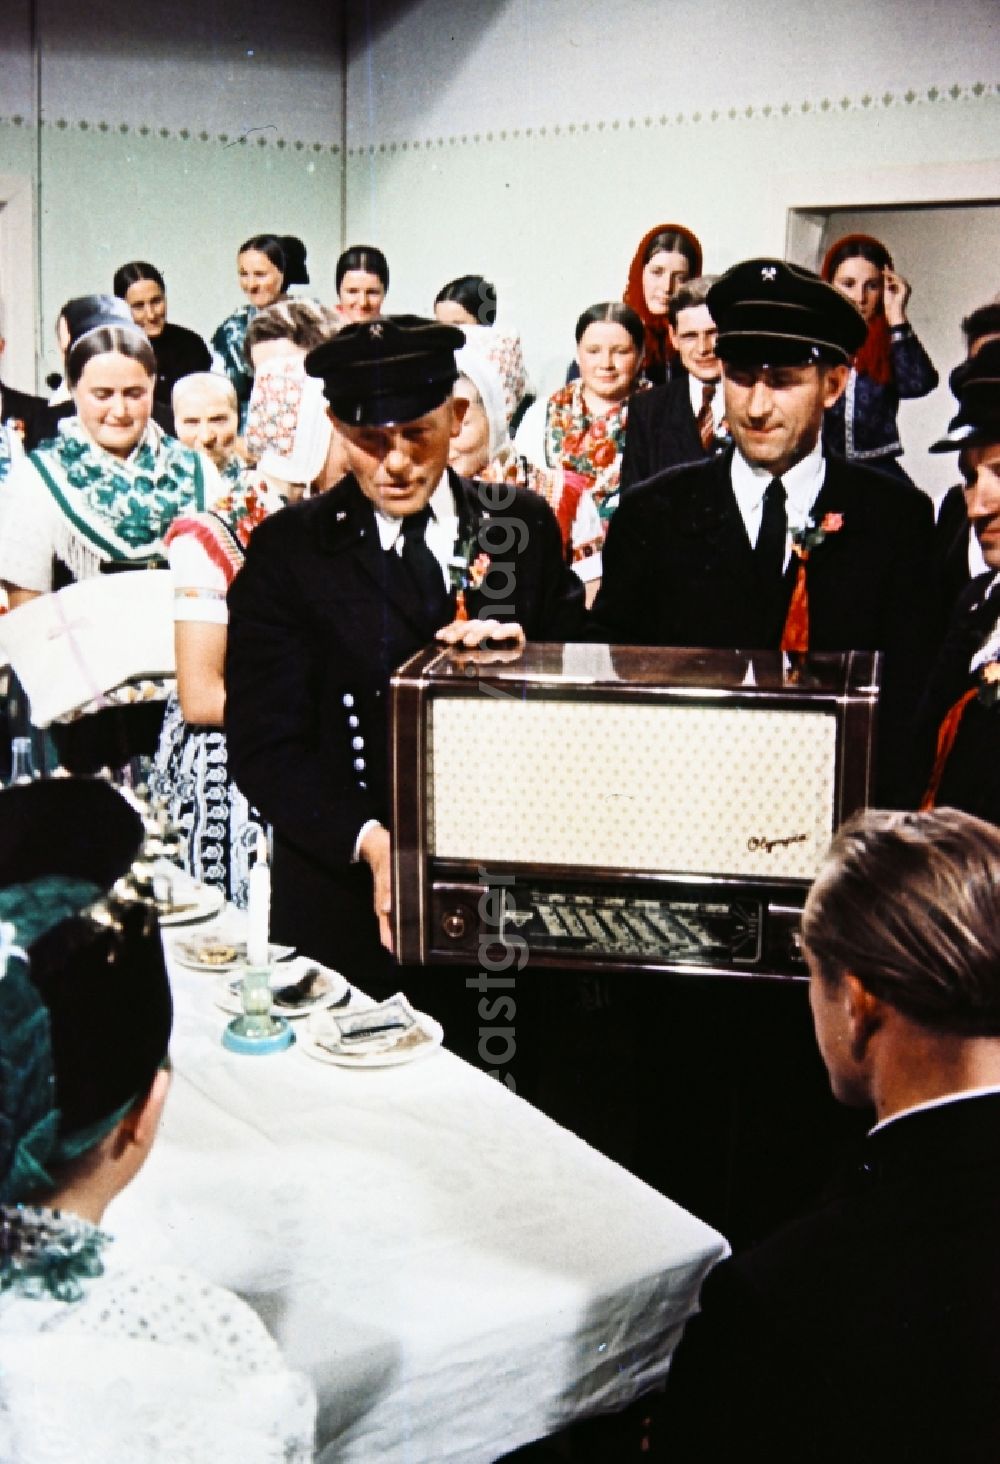 Milkel: Wedding gift transfer Sorbian inhabitants in the form of an old tube radio Olympia in Milkel in the state of Saxony in the territory of the former GDR, German Democratic Republic